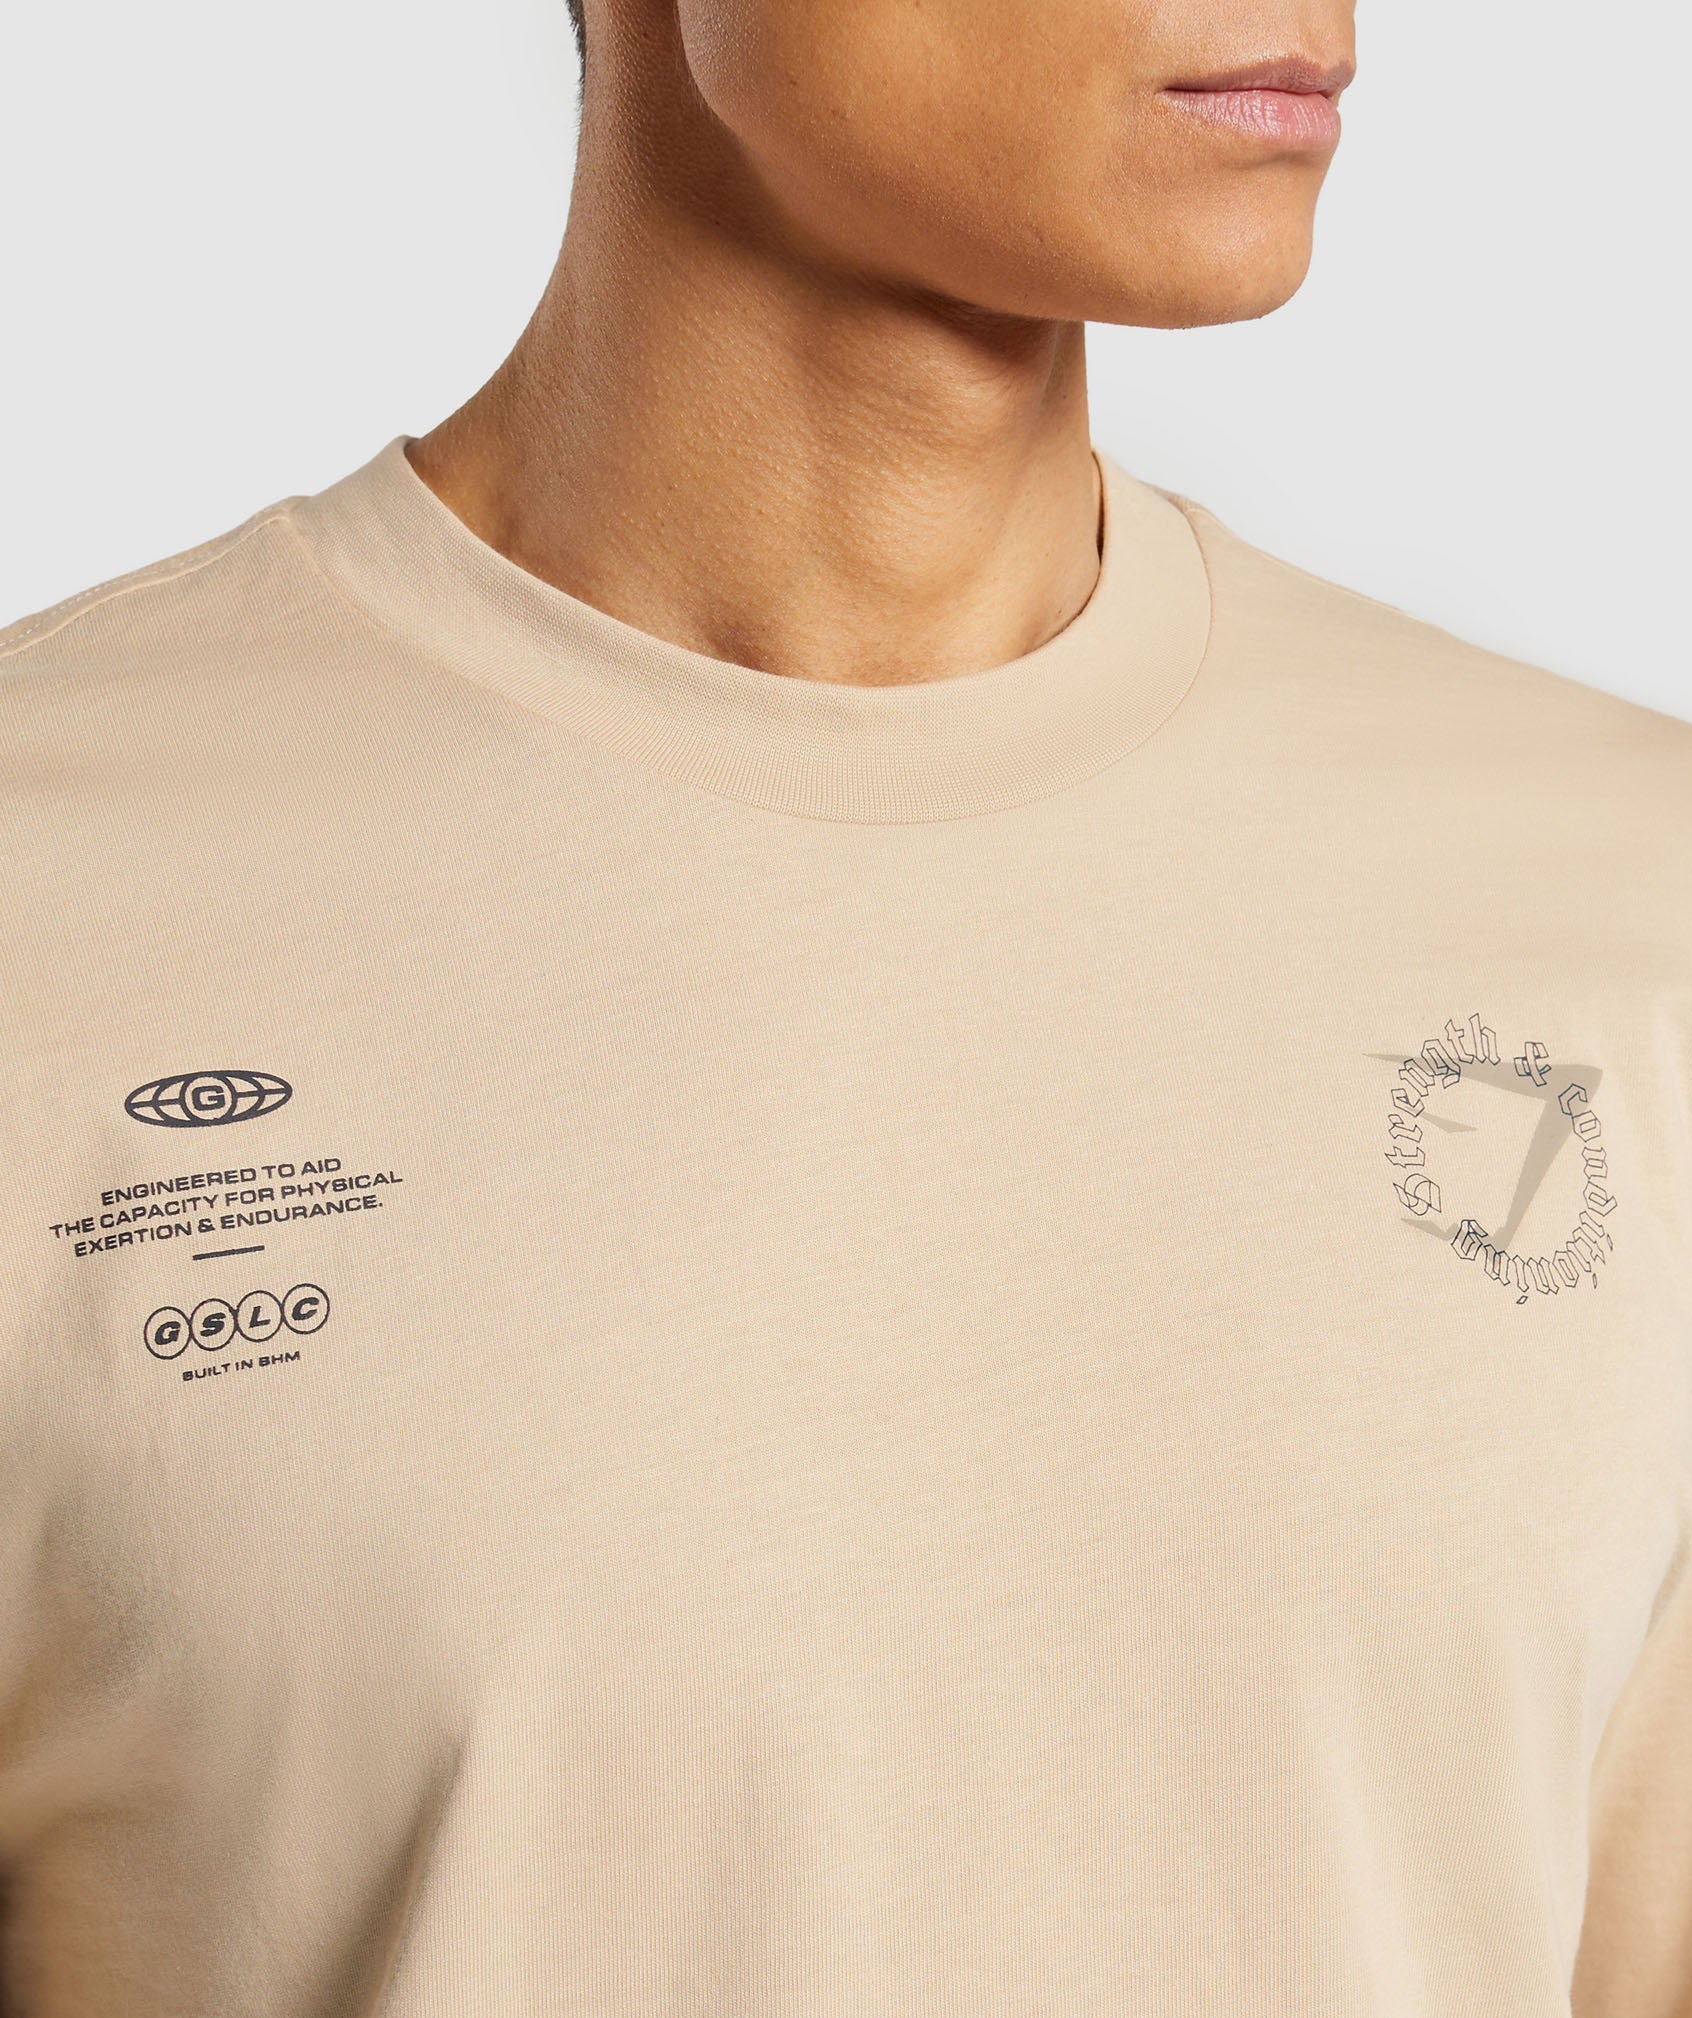 Strength and Conditioning Long Sleeve T-Shirt in Vanilla Beige - view 6